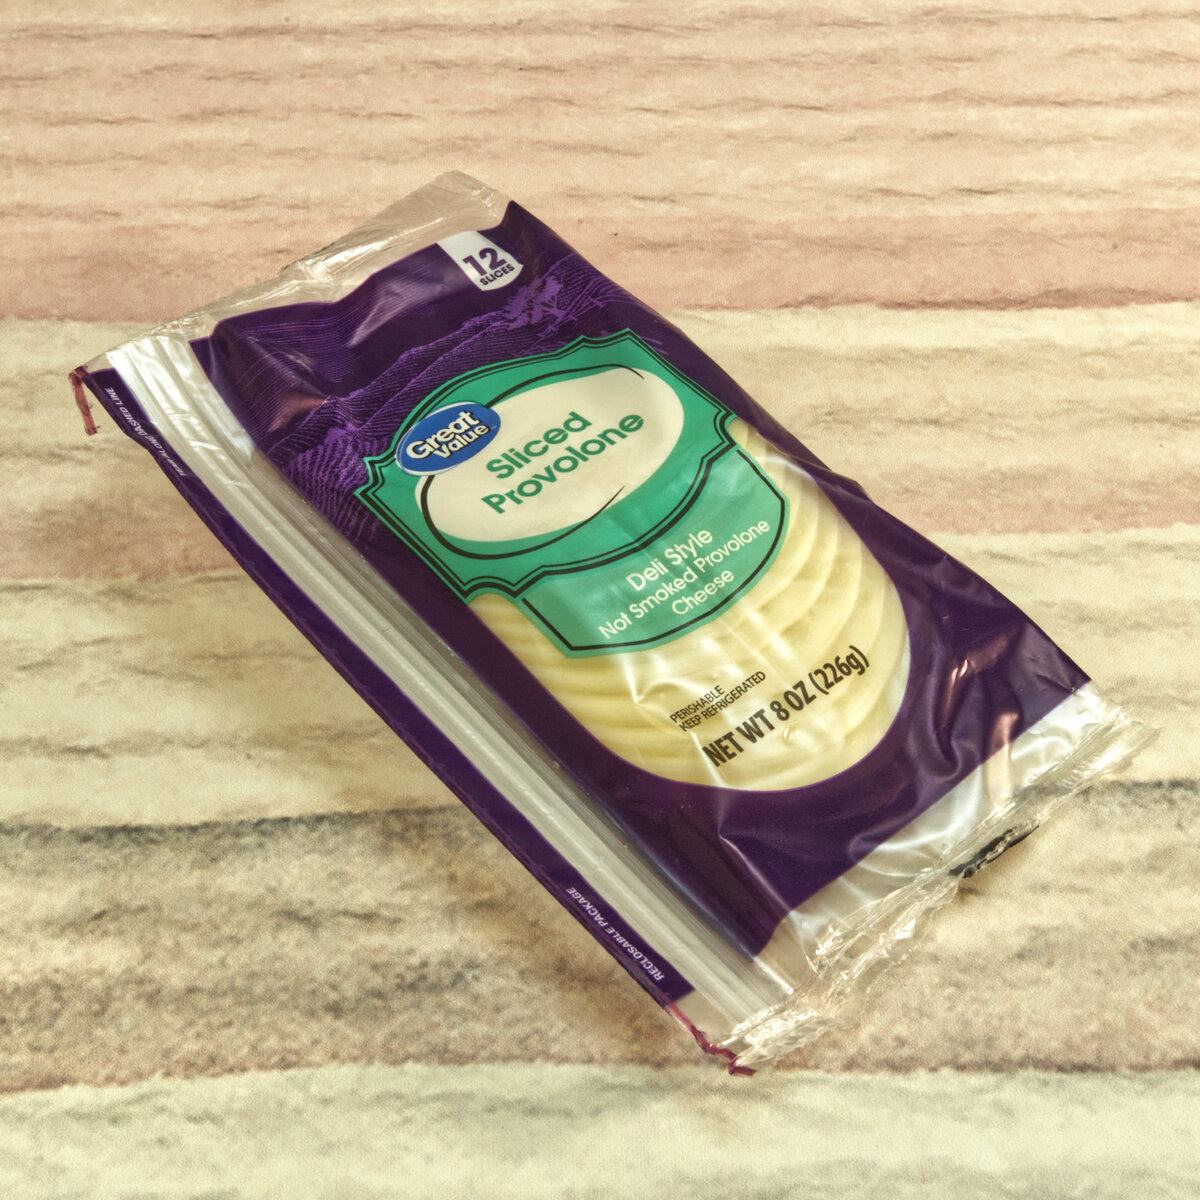 Packaged Sliced Provolone Cheese